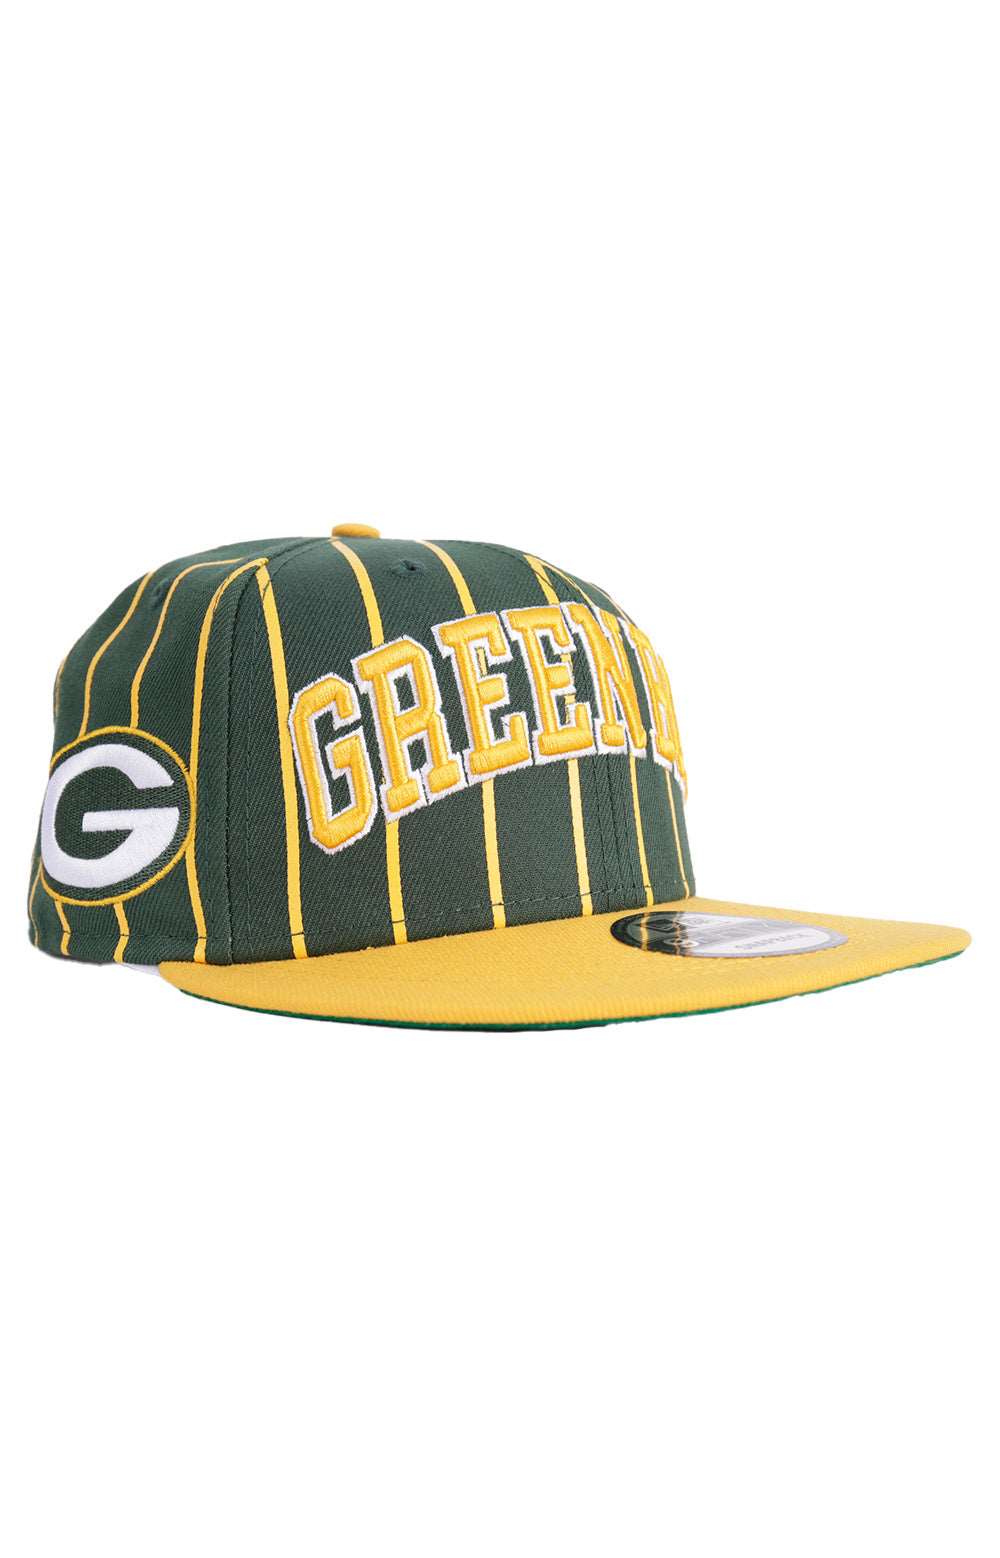 Green Bay Packers City Arch 950 Snap-Back Hat